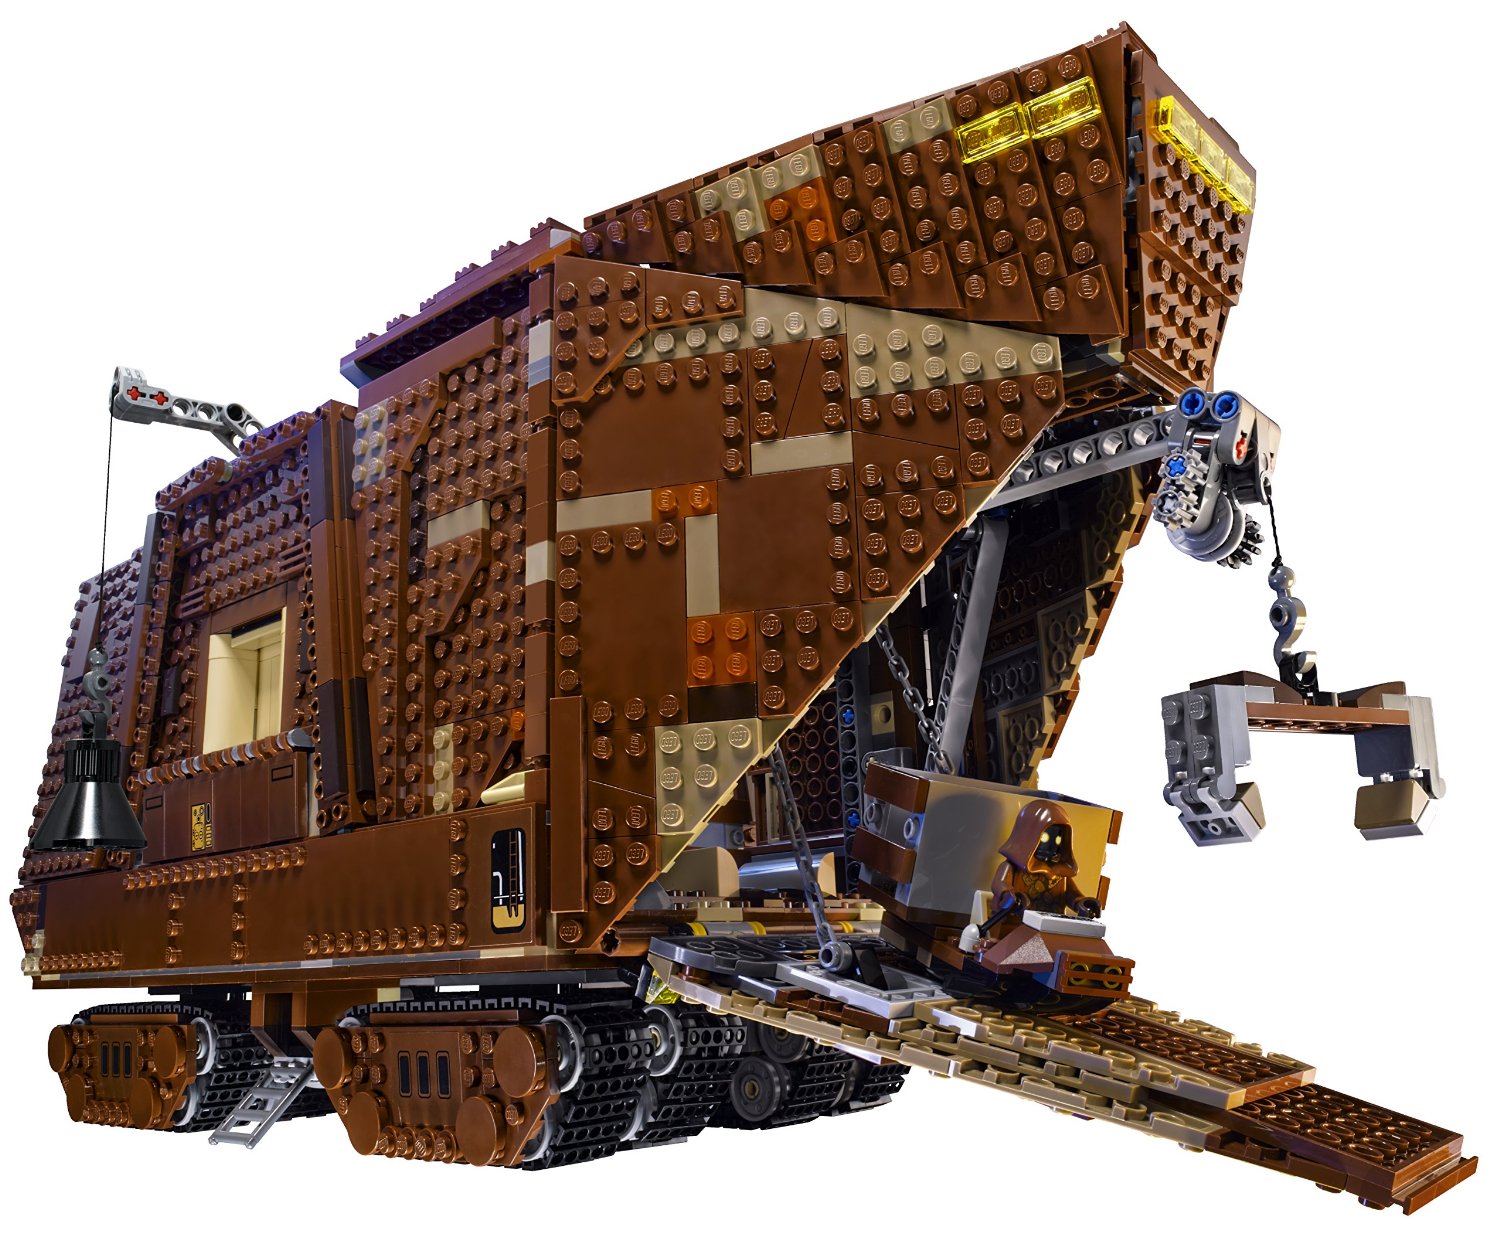 These Are The 14 Most Challenging Lego Sets To Build - Simplemost